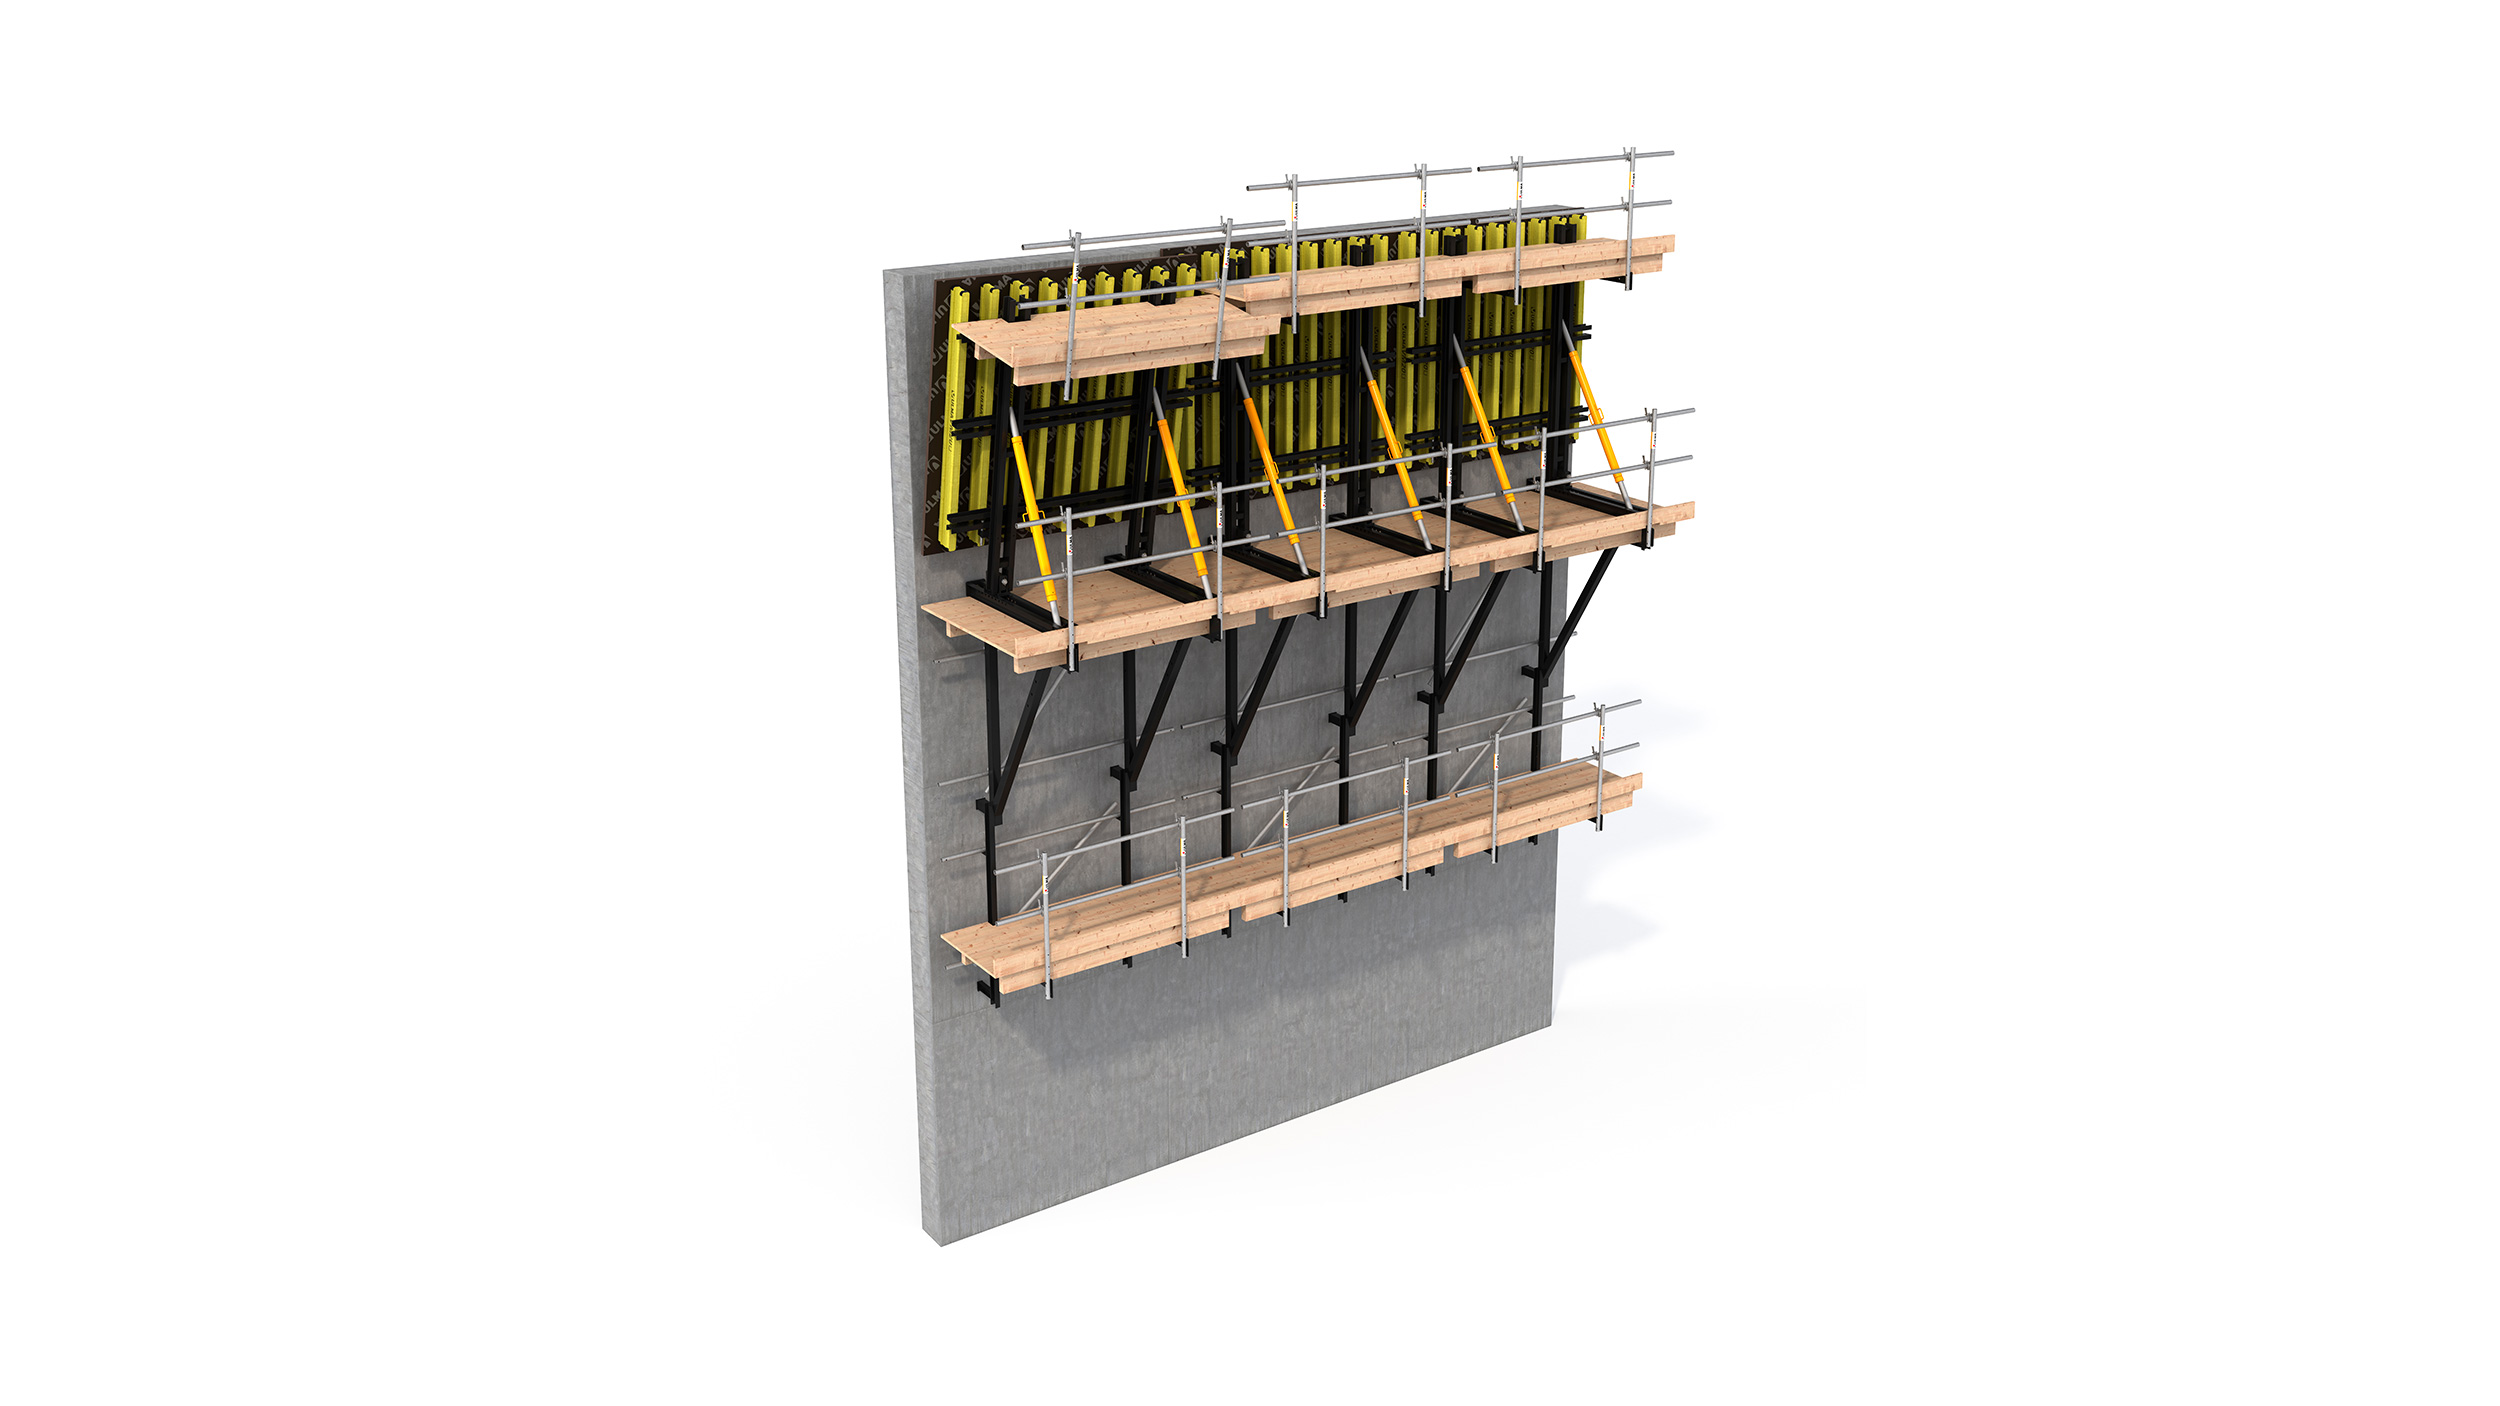 A configurable climbing formwork for straight or inclined walls. Most suitable for the construction of dams, floodgates or galleries.